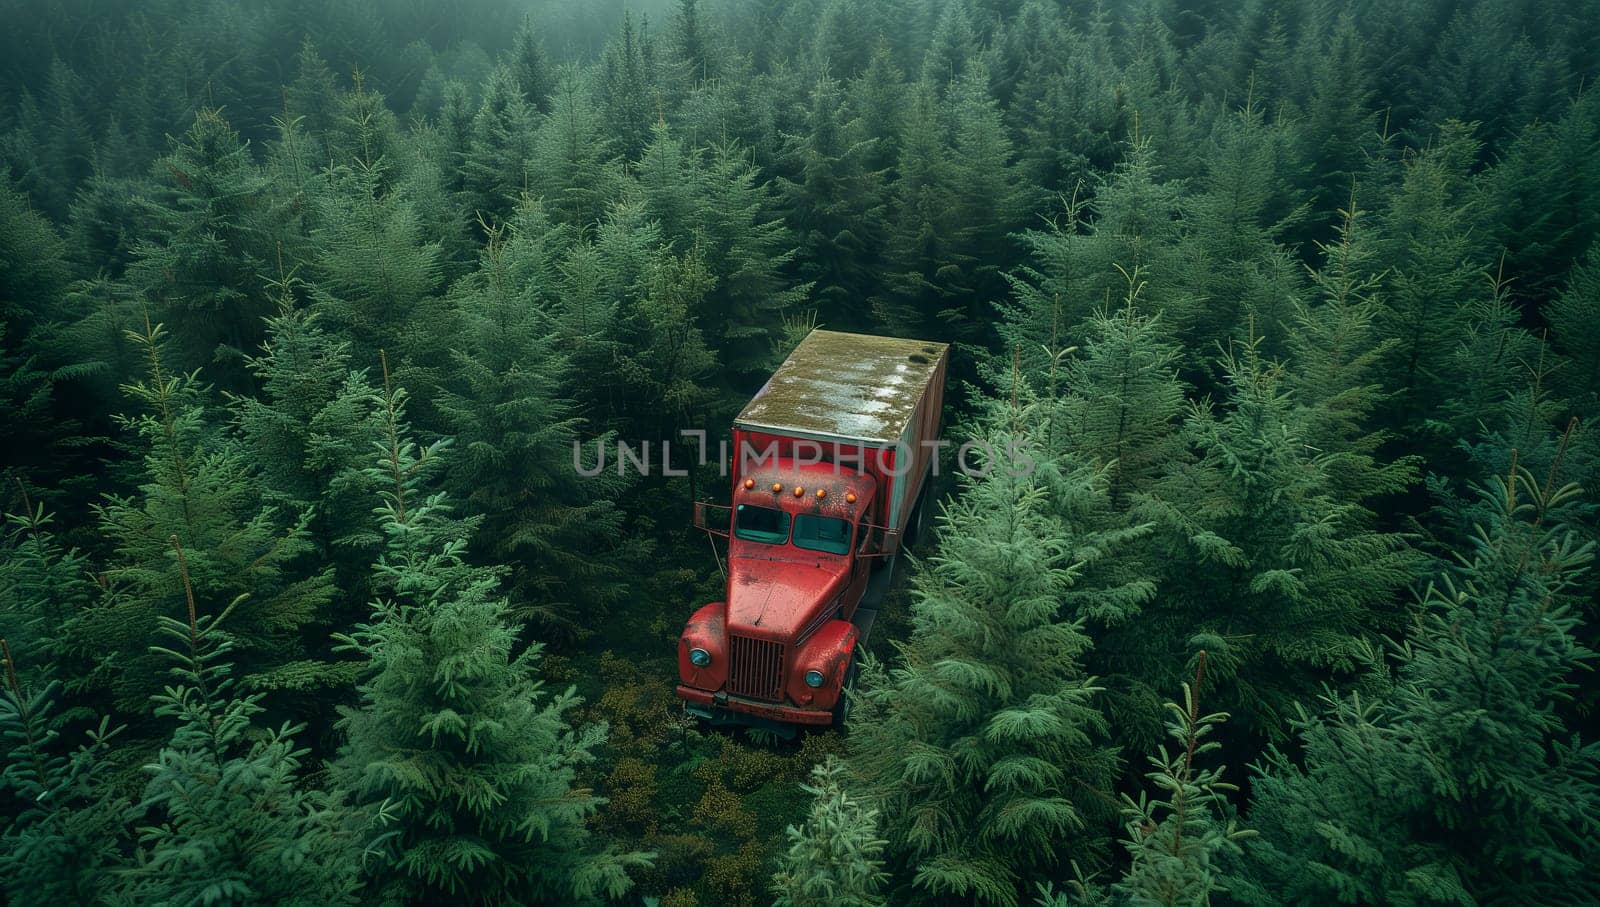 An aerial view of a red truck driving through a dense forest, surrounded by lush green trees, evergreen plants, and a natural landscape with a road and scattered houses